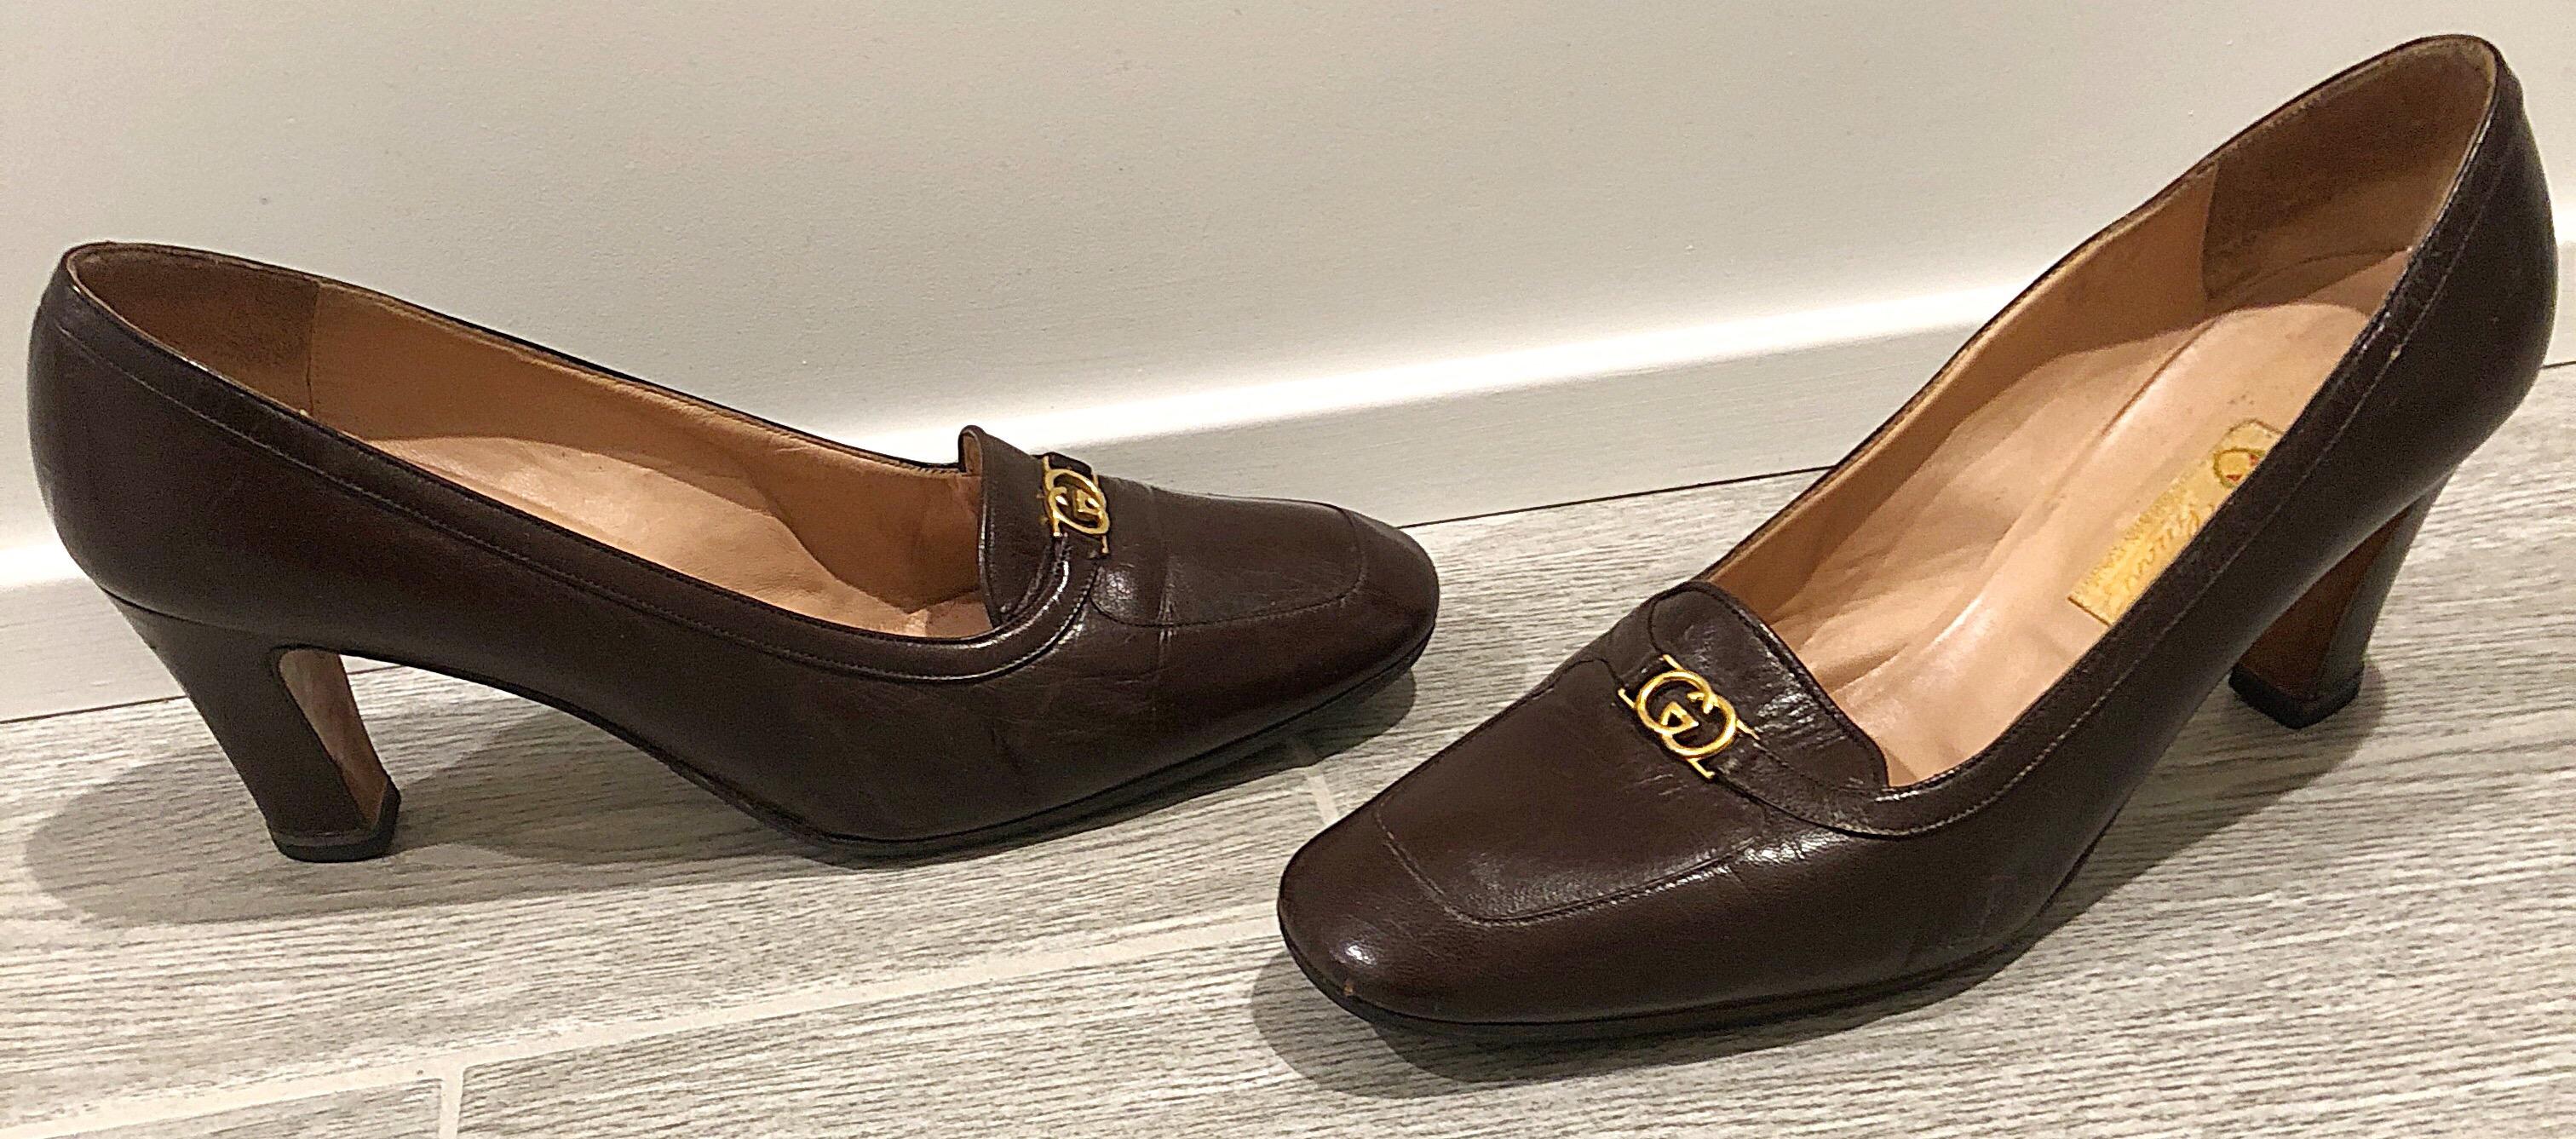 Women's Vintage Gucci 1970s Sz 7.5 Chocolate Brown High Heel 70s Loafers Logo Shoes